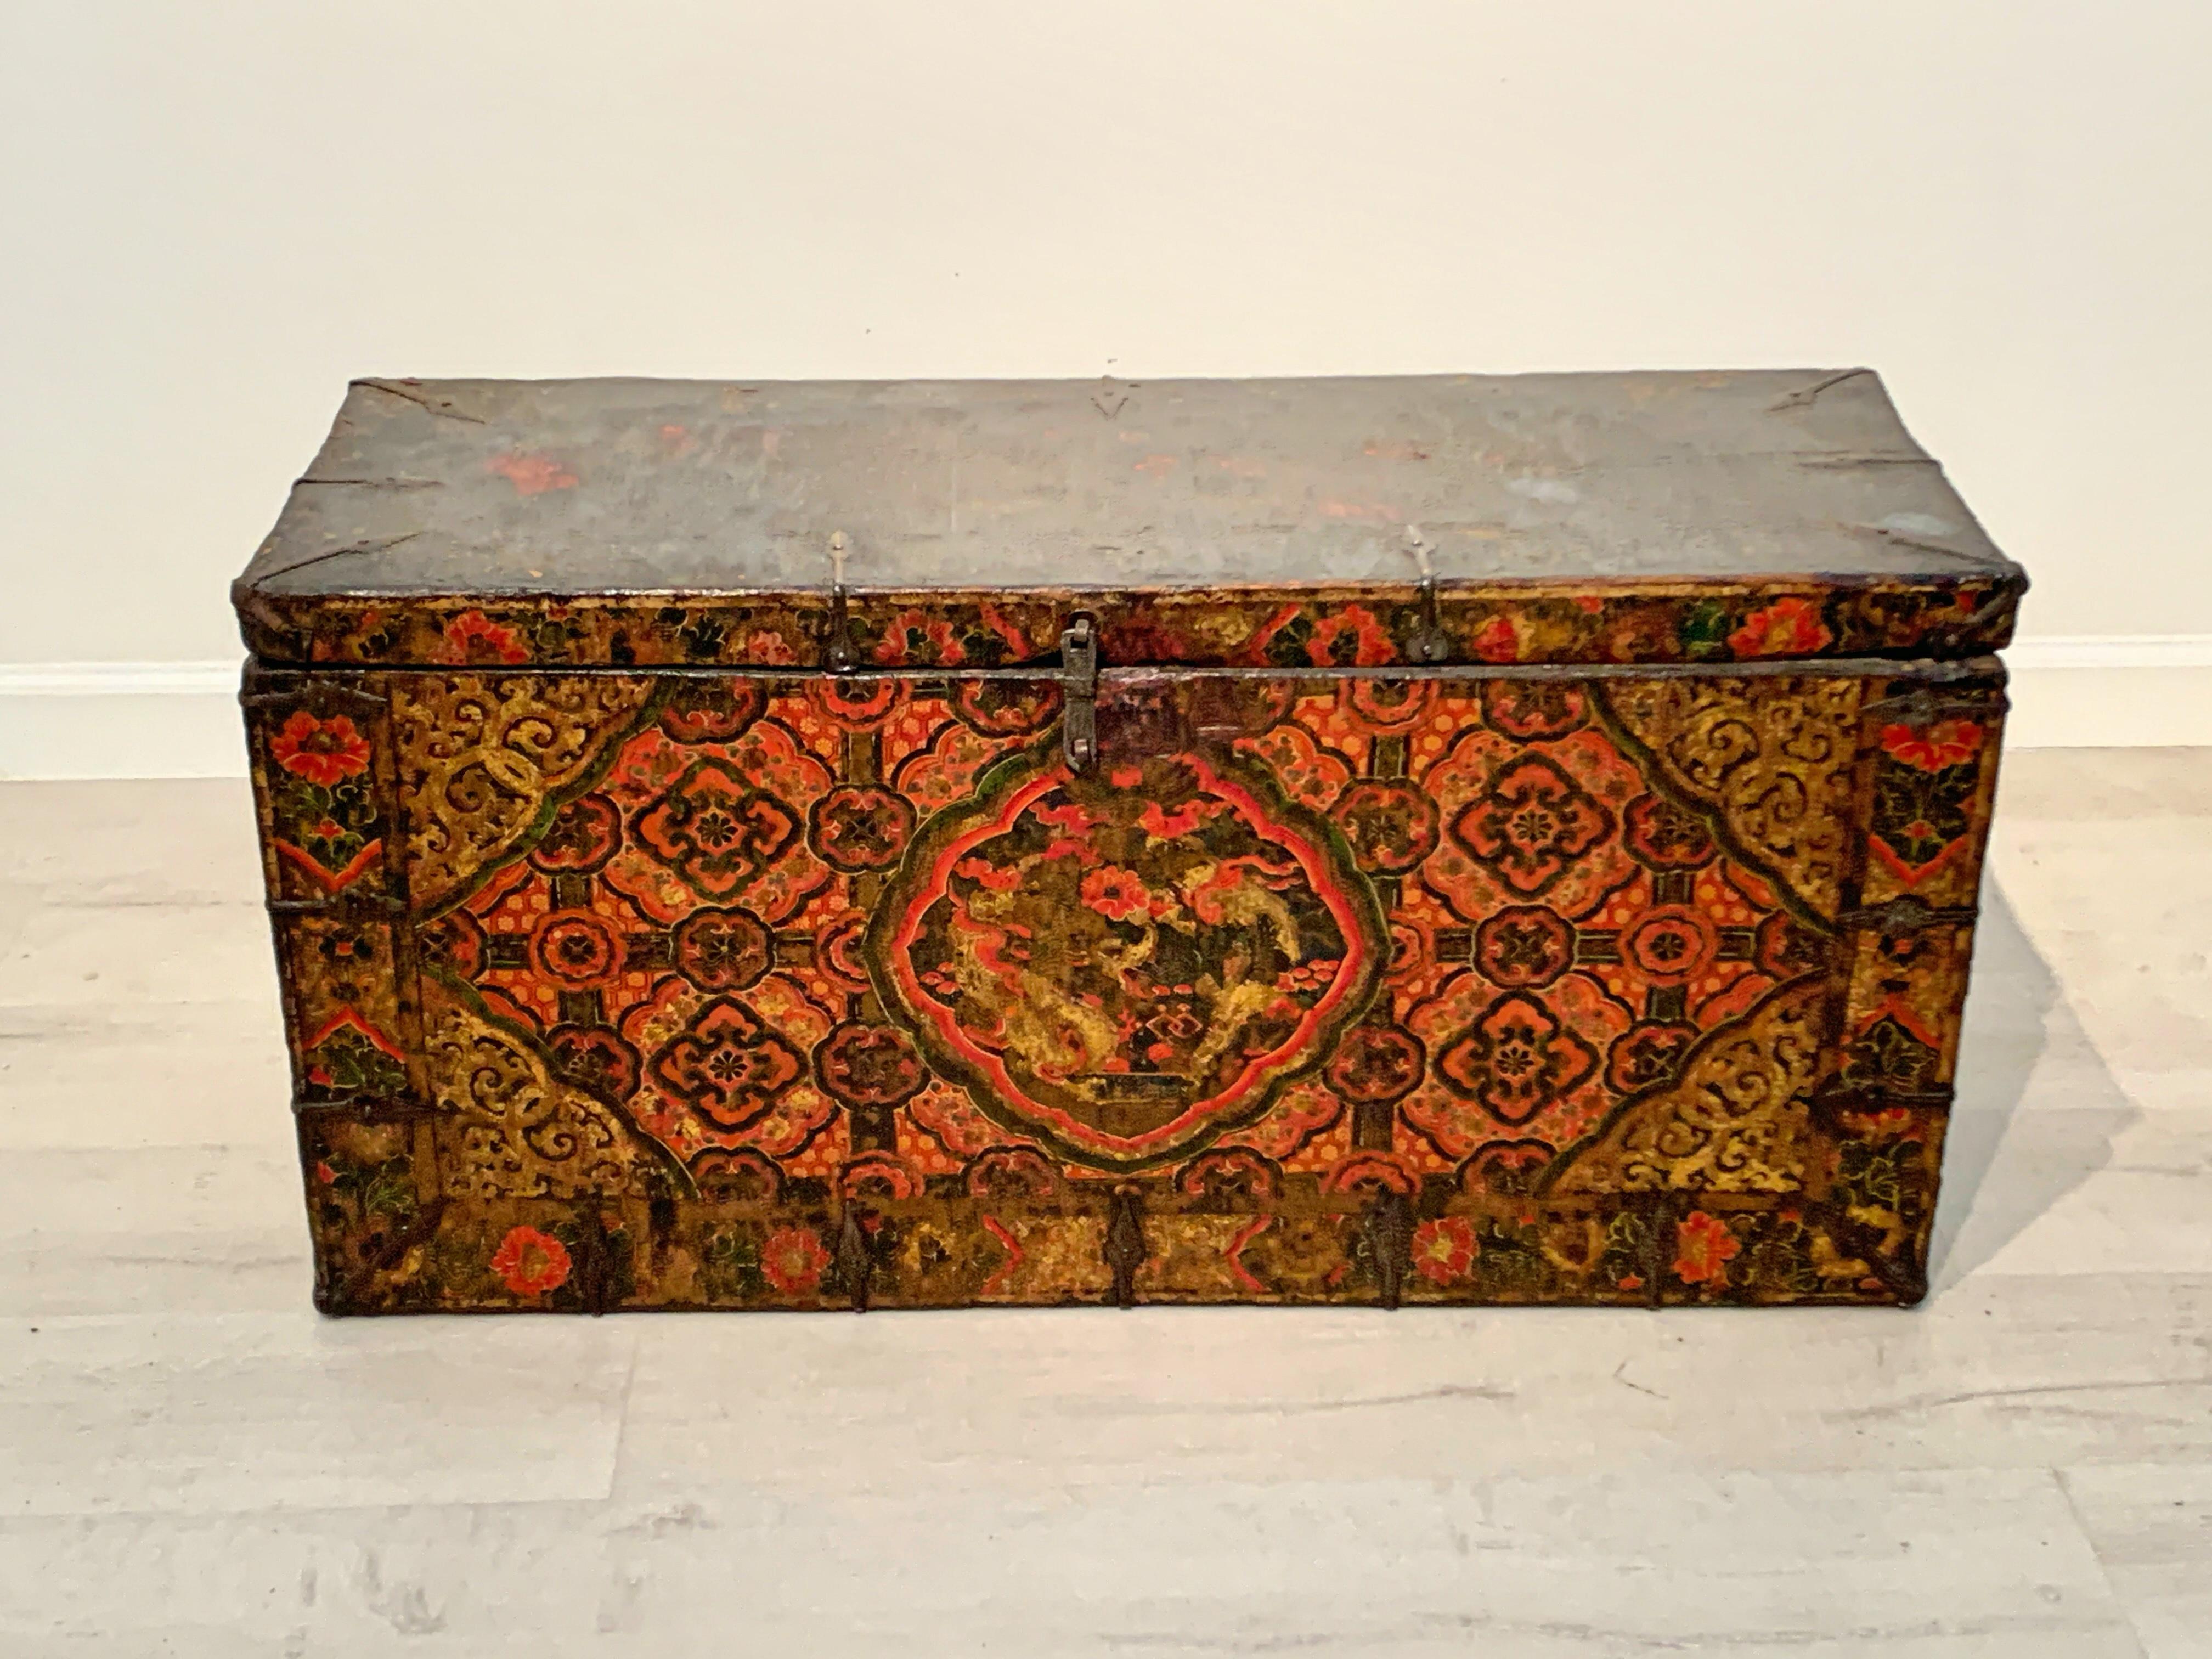 A vibrant and powerful Tibetan polychrome painted and gilt storage chest with a dragon and 'kati rimo' (brocade) design, 17th-18th century, Tibet.

The medium sized Tibetan storage trunk of simple wood construction, with a simple metal latch and